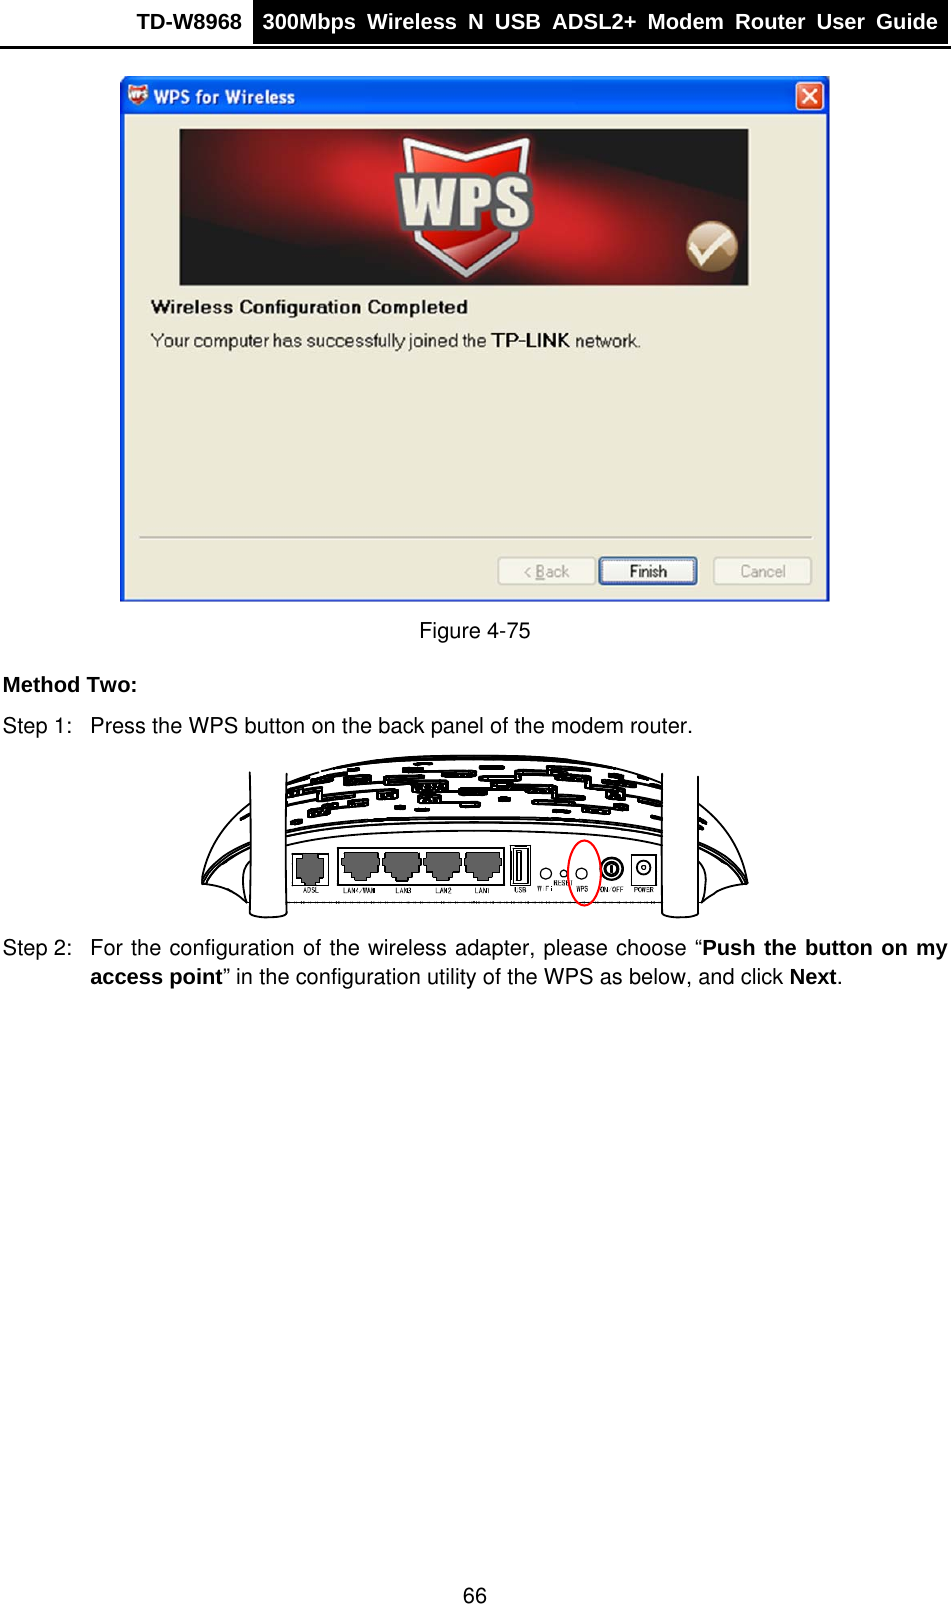 TD-W8968  300Mbps Wireless N USB ADSL2+ Modem Router User Guide   Figure 4-75 Method Two: Step 1:  Press the WPS button on the back panel of the modem router.  Step 2:  For the configuration of the wireless adapter, please choose “Push the button on my access point” in the configuration utility of the WPS as below, and click Next.  66 